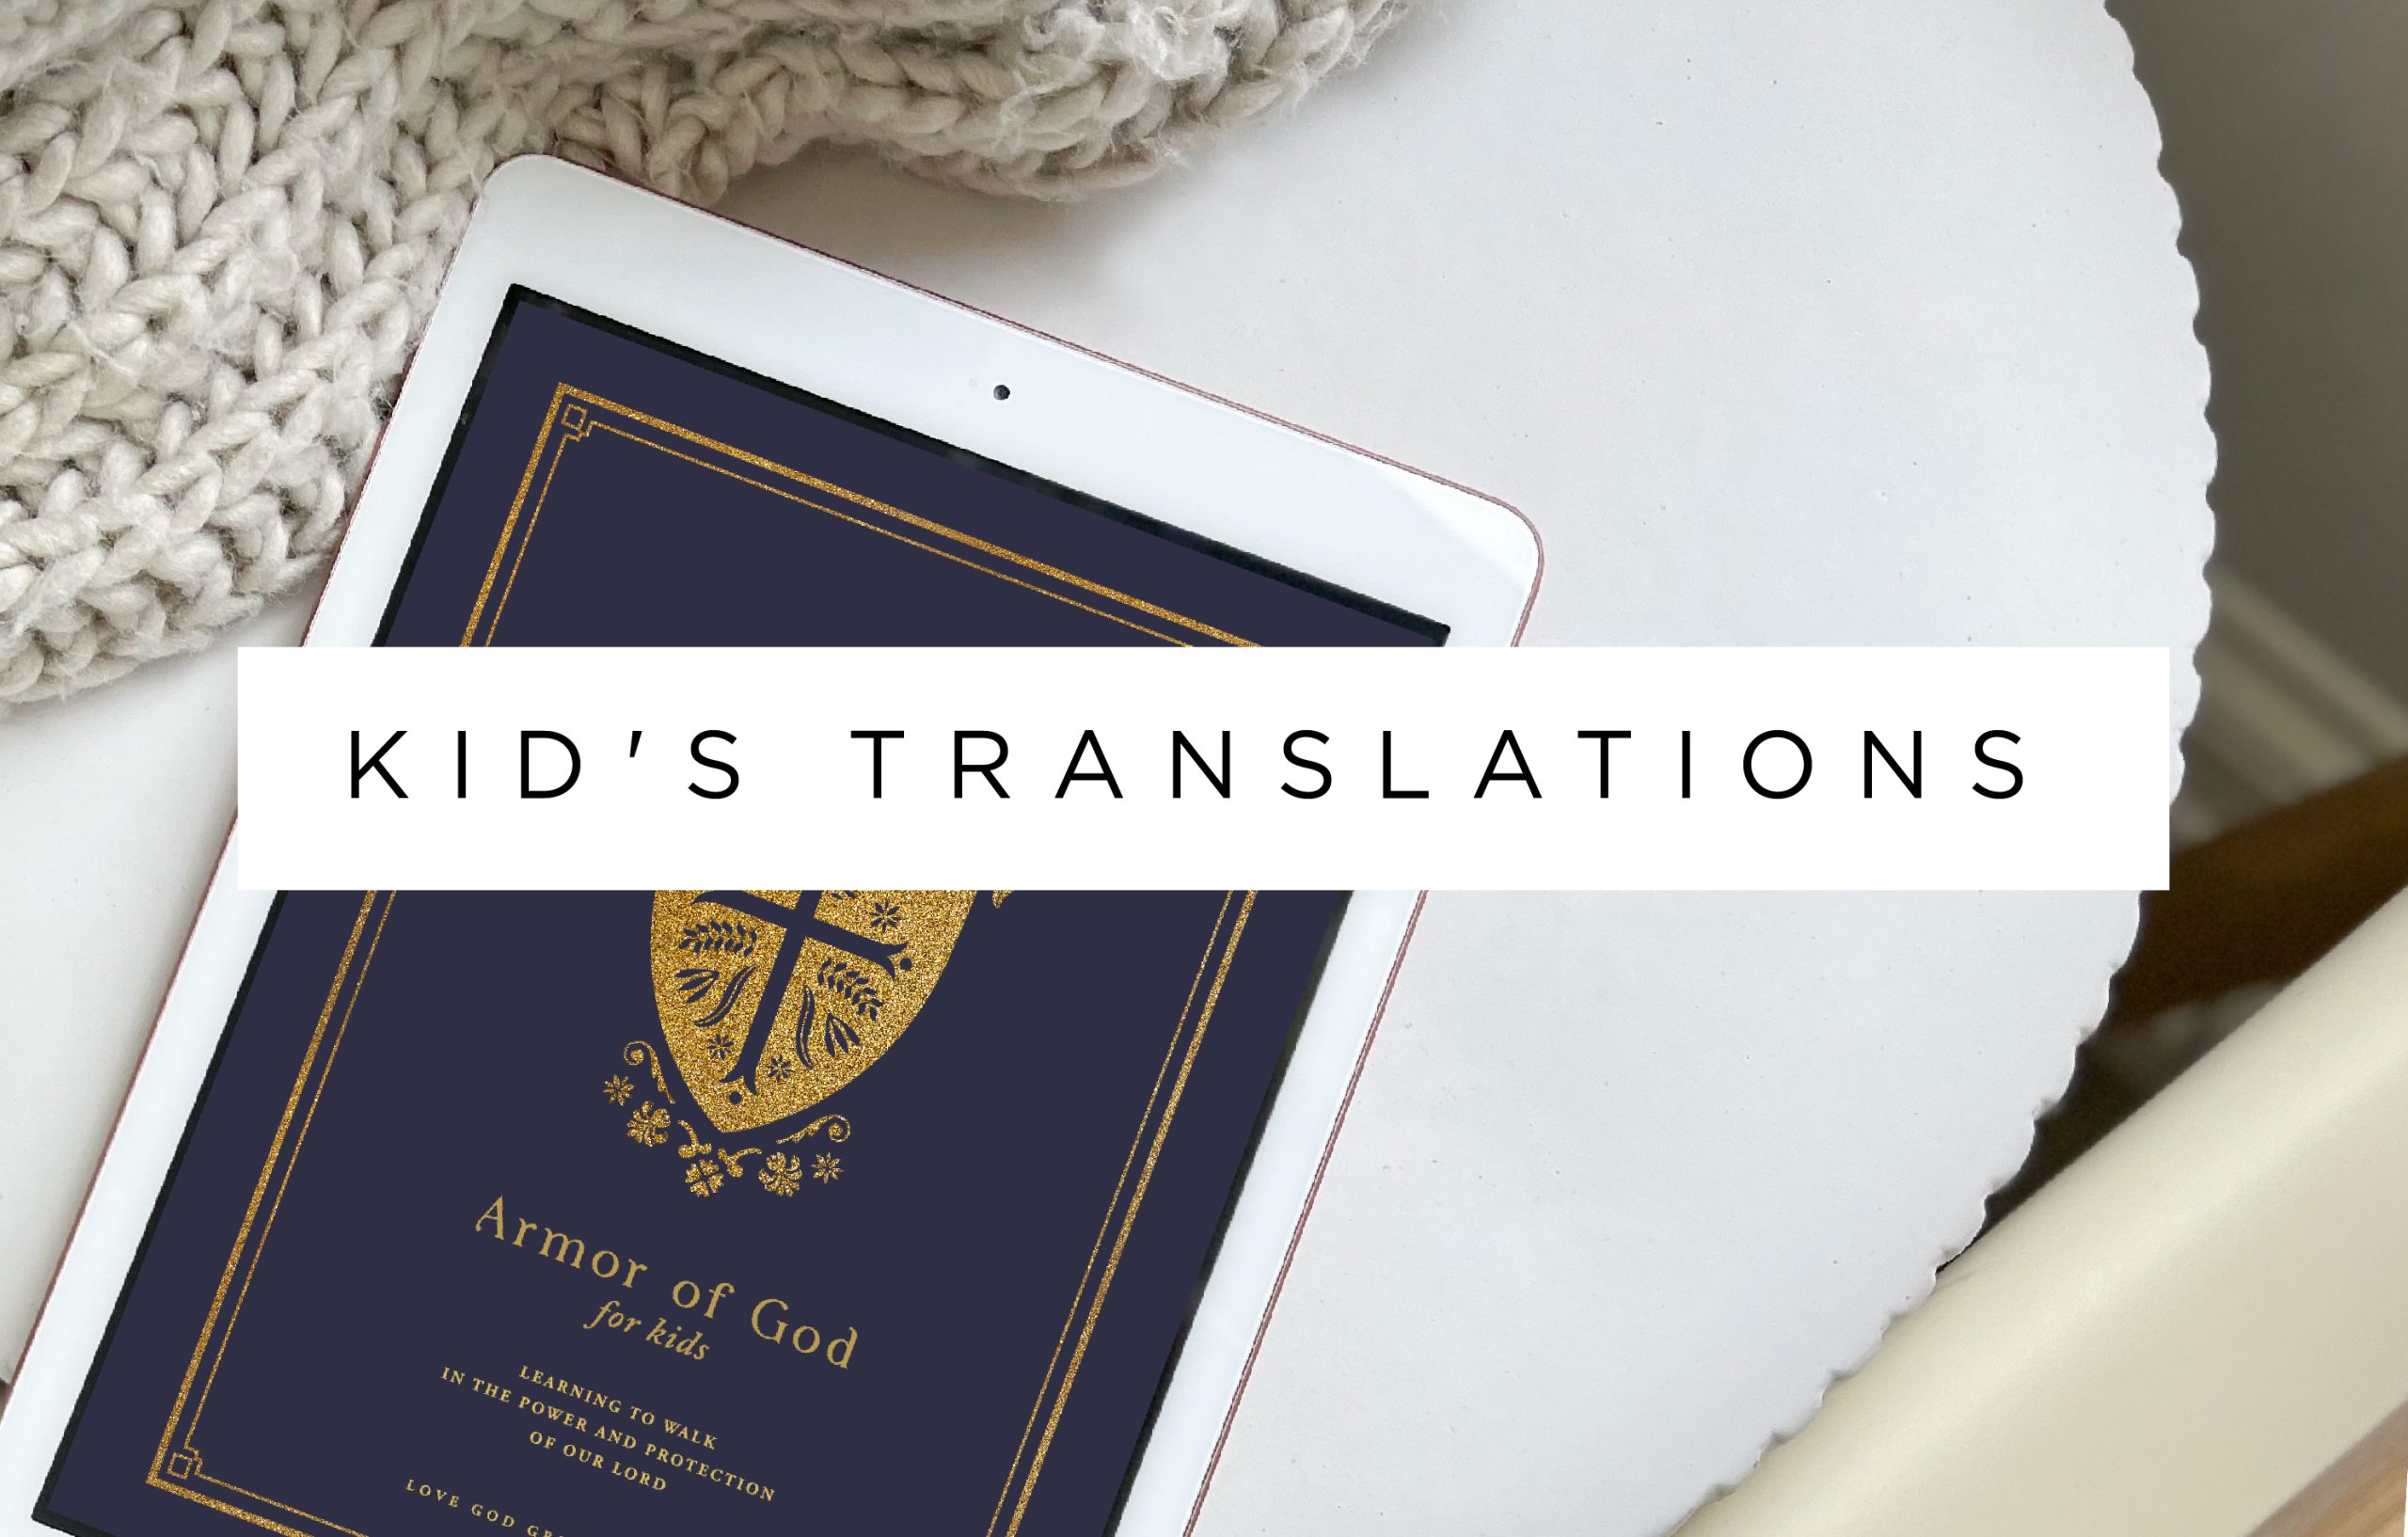 Twelve translations of the Armor of God Bible study for KIDS are now available for free!